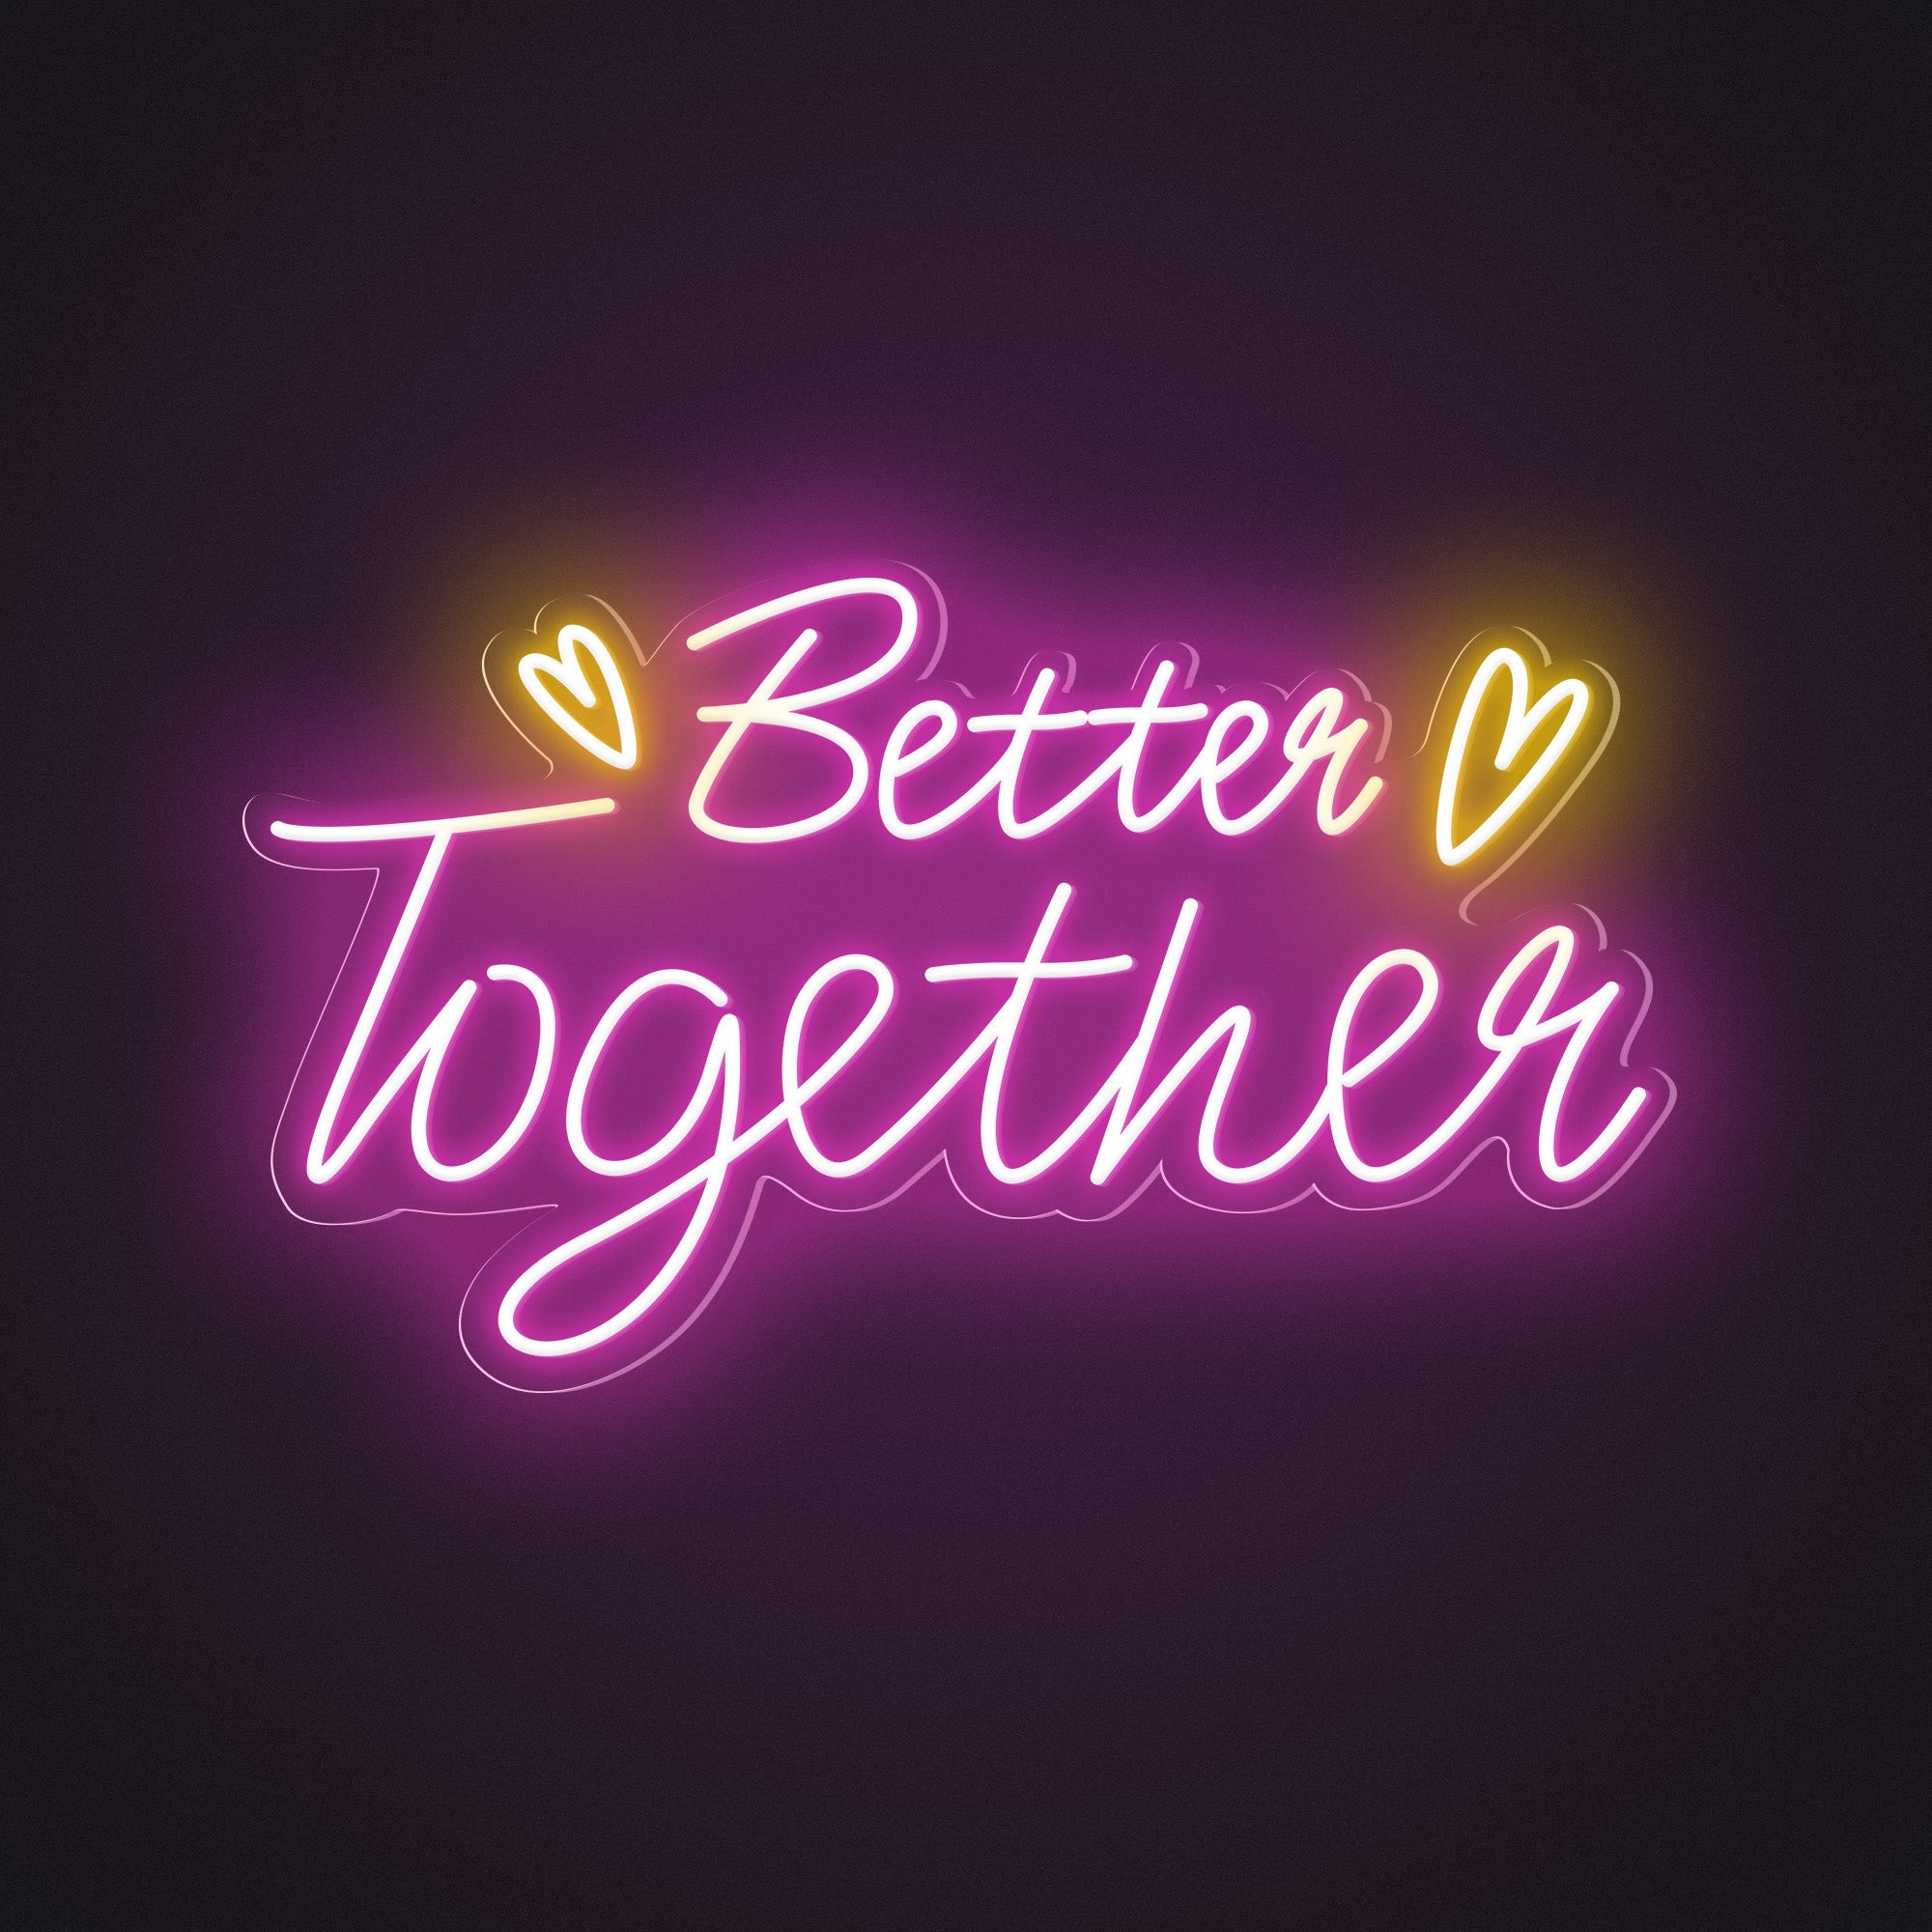 "Better Together" Words & Hearts Neon Sign